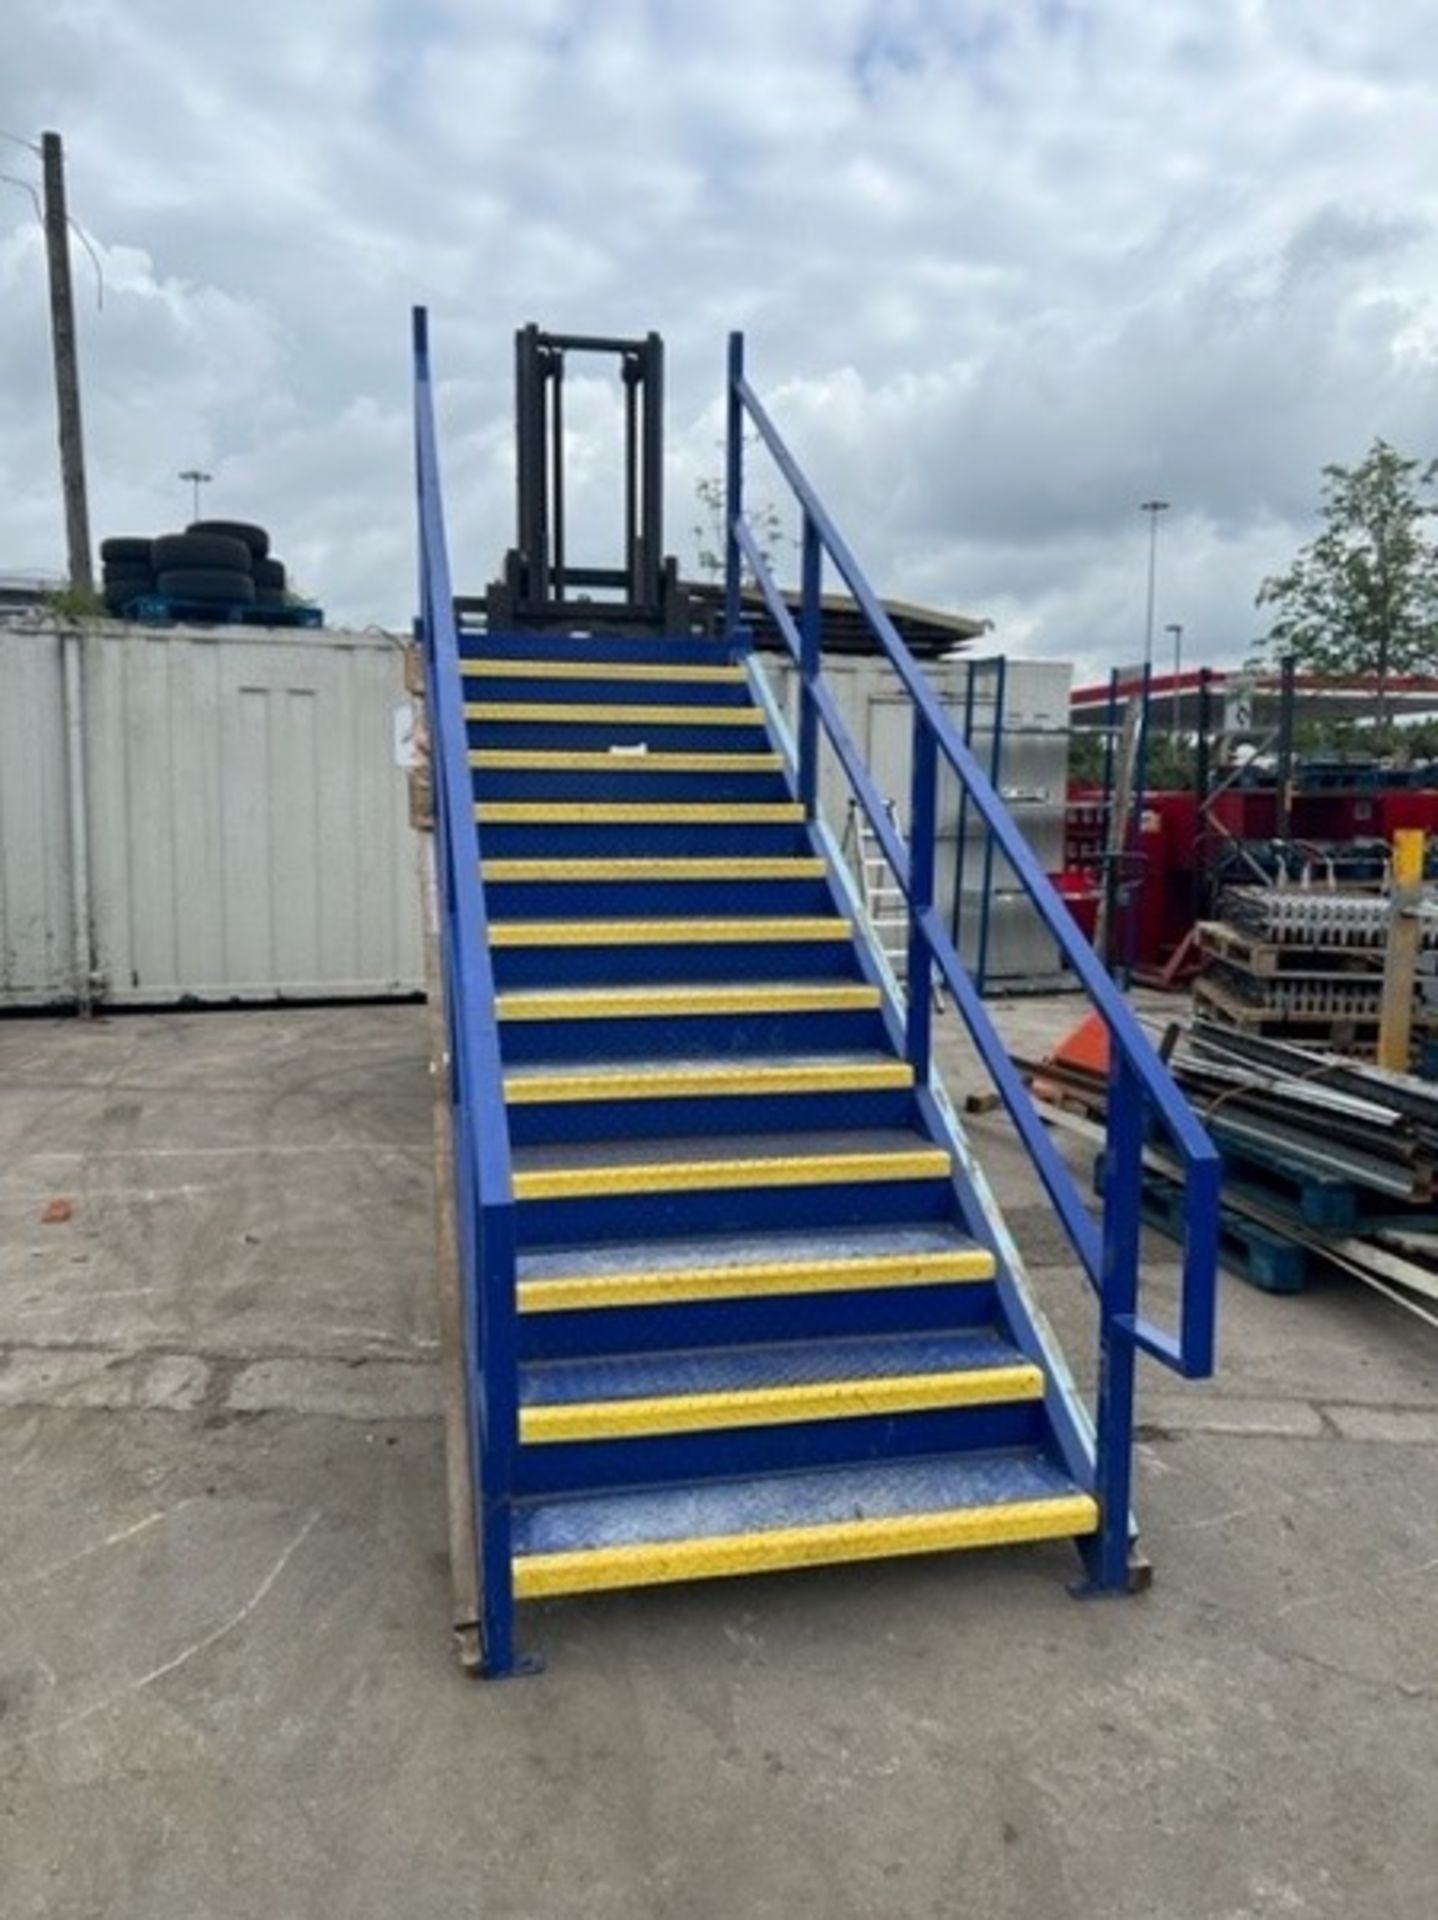 RRP £3600 Lot To Contain Blue Mezzanine Floor Steel Staircase 2.13M Finishing Height - Measuremnts